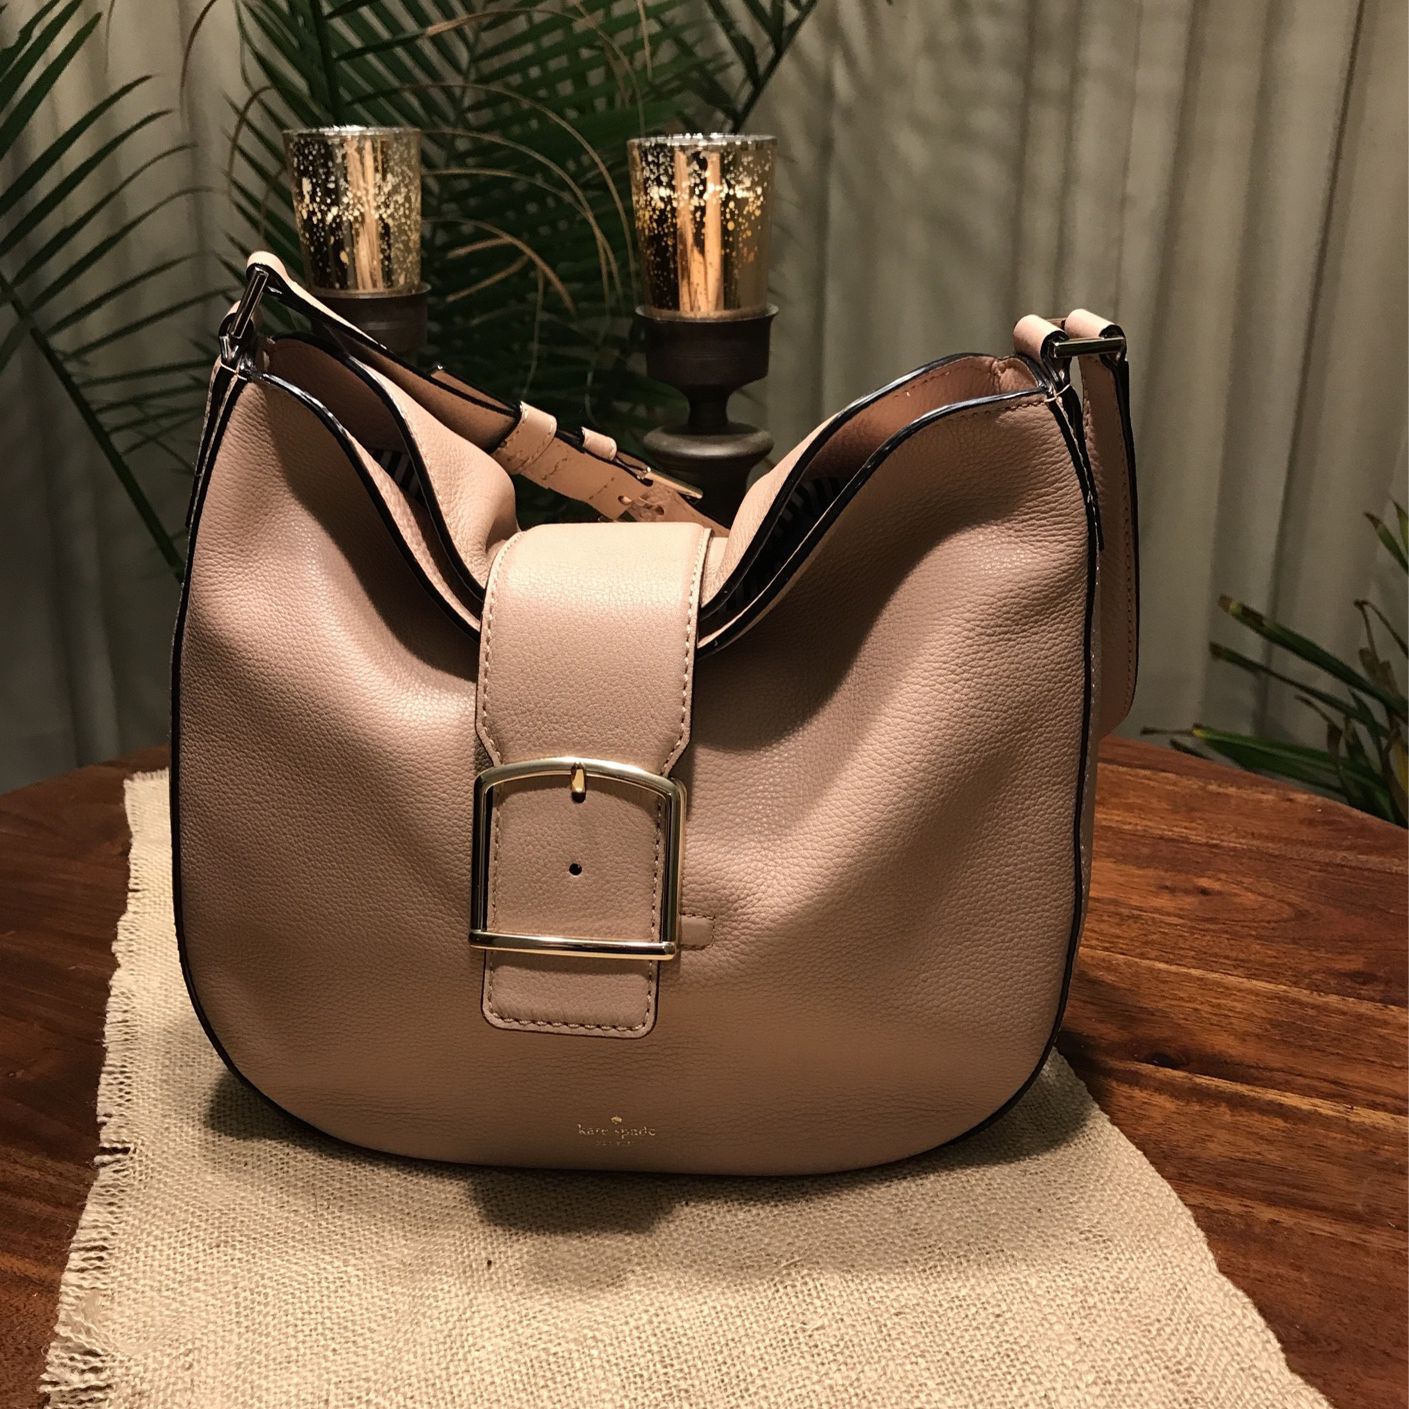 Kate spade Leather Bag Nude Color  !!!! Must Go Today!